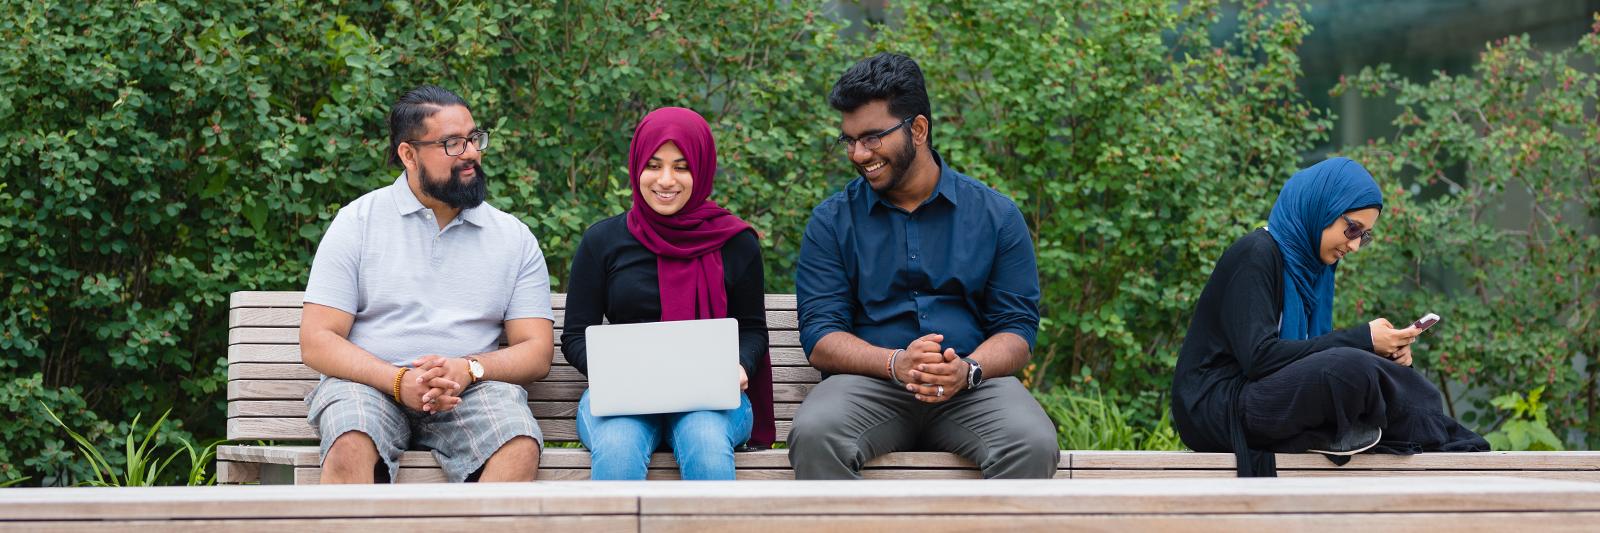 students sitting on bench looking at a laptop